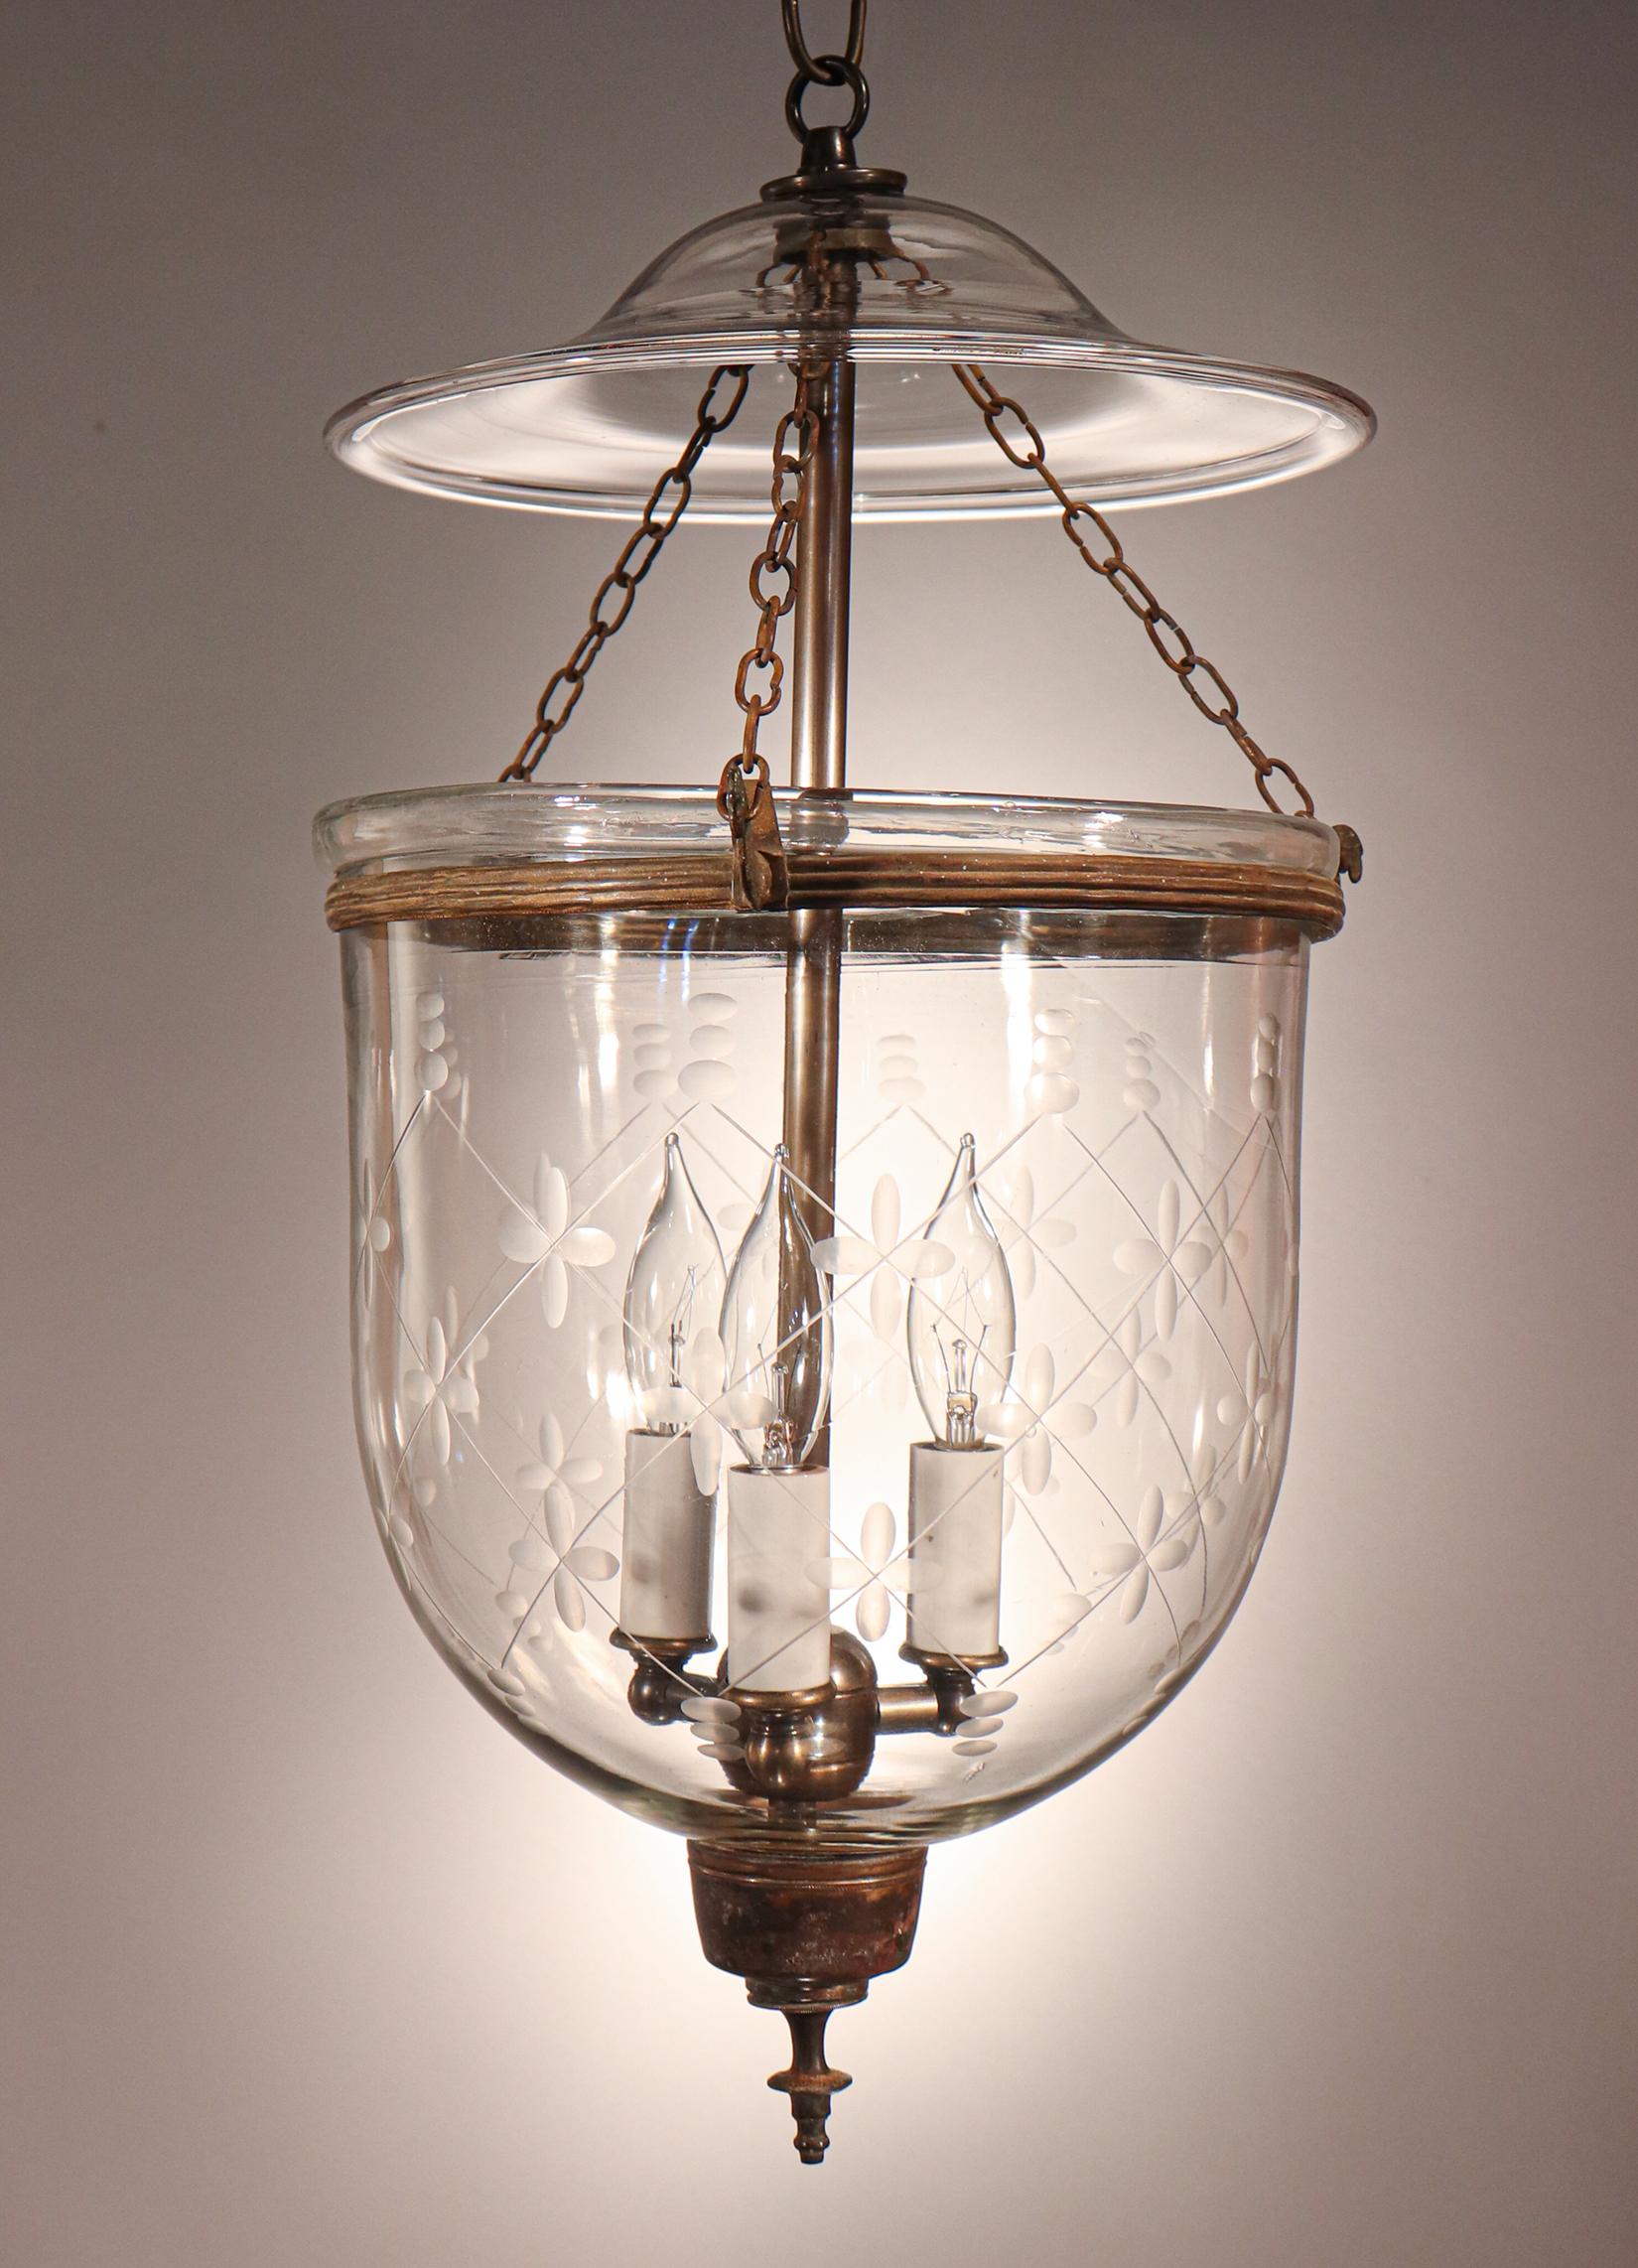 An antique English bell jar lantern with classic form and an etched trellis motif. This circa 1860 pendant features excellent quality hand blown glass and its original rolled brass band and finial/candle holder base with nice patina. The fixture has